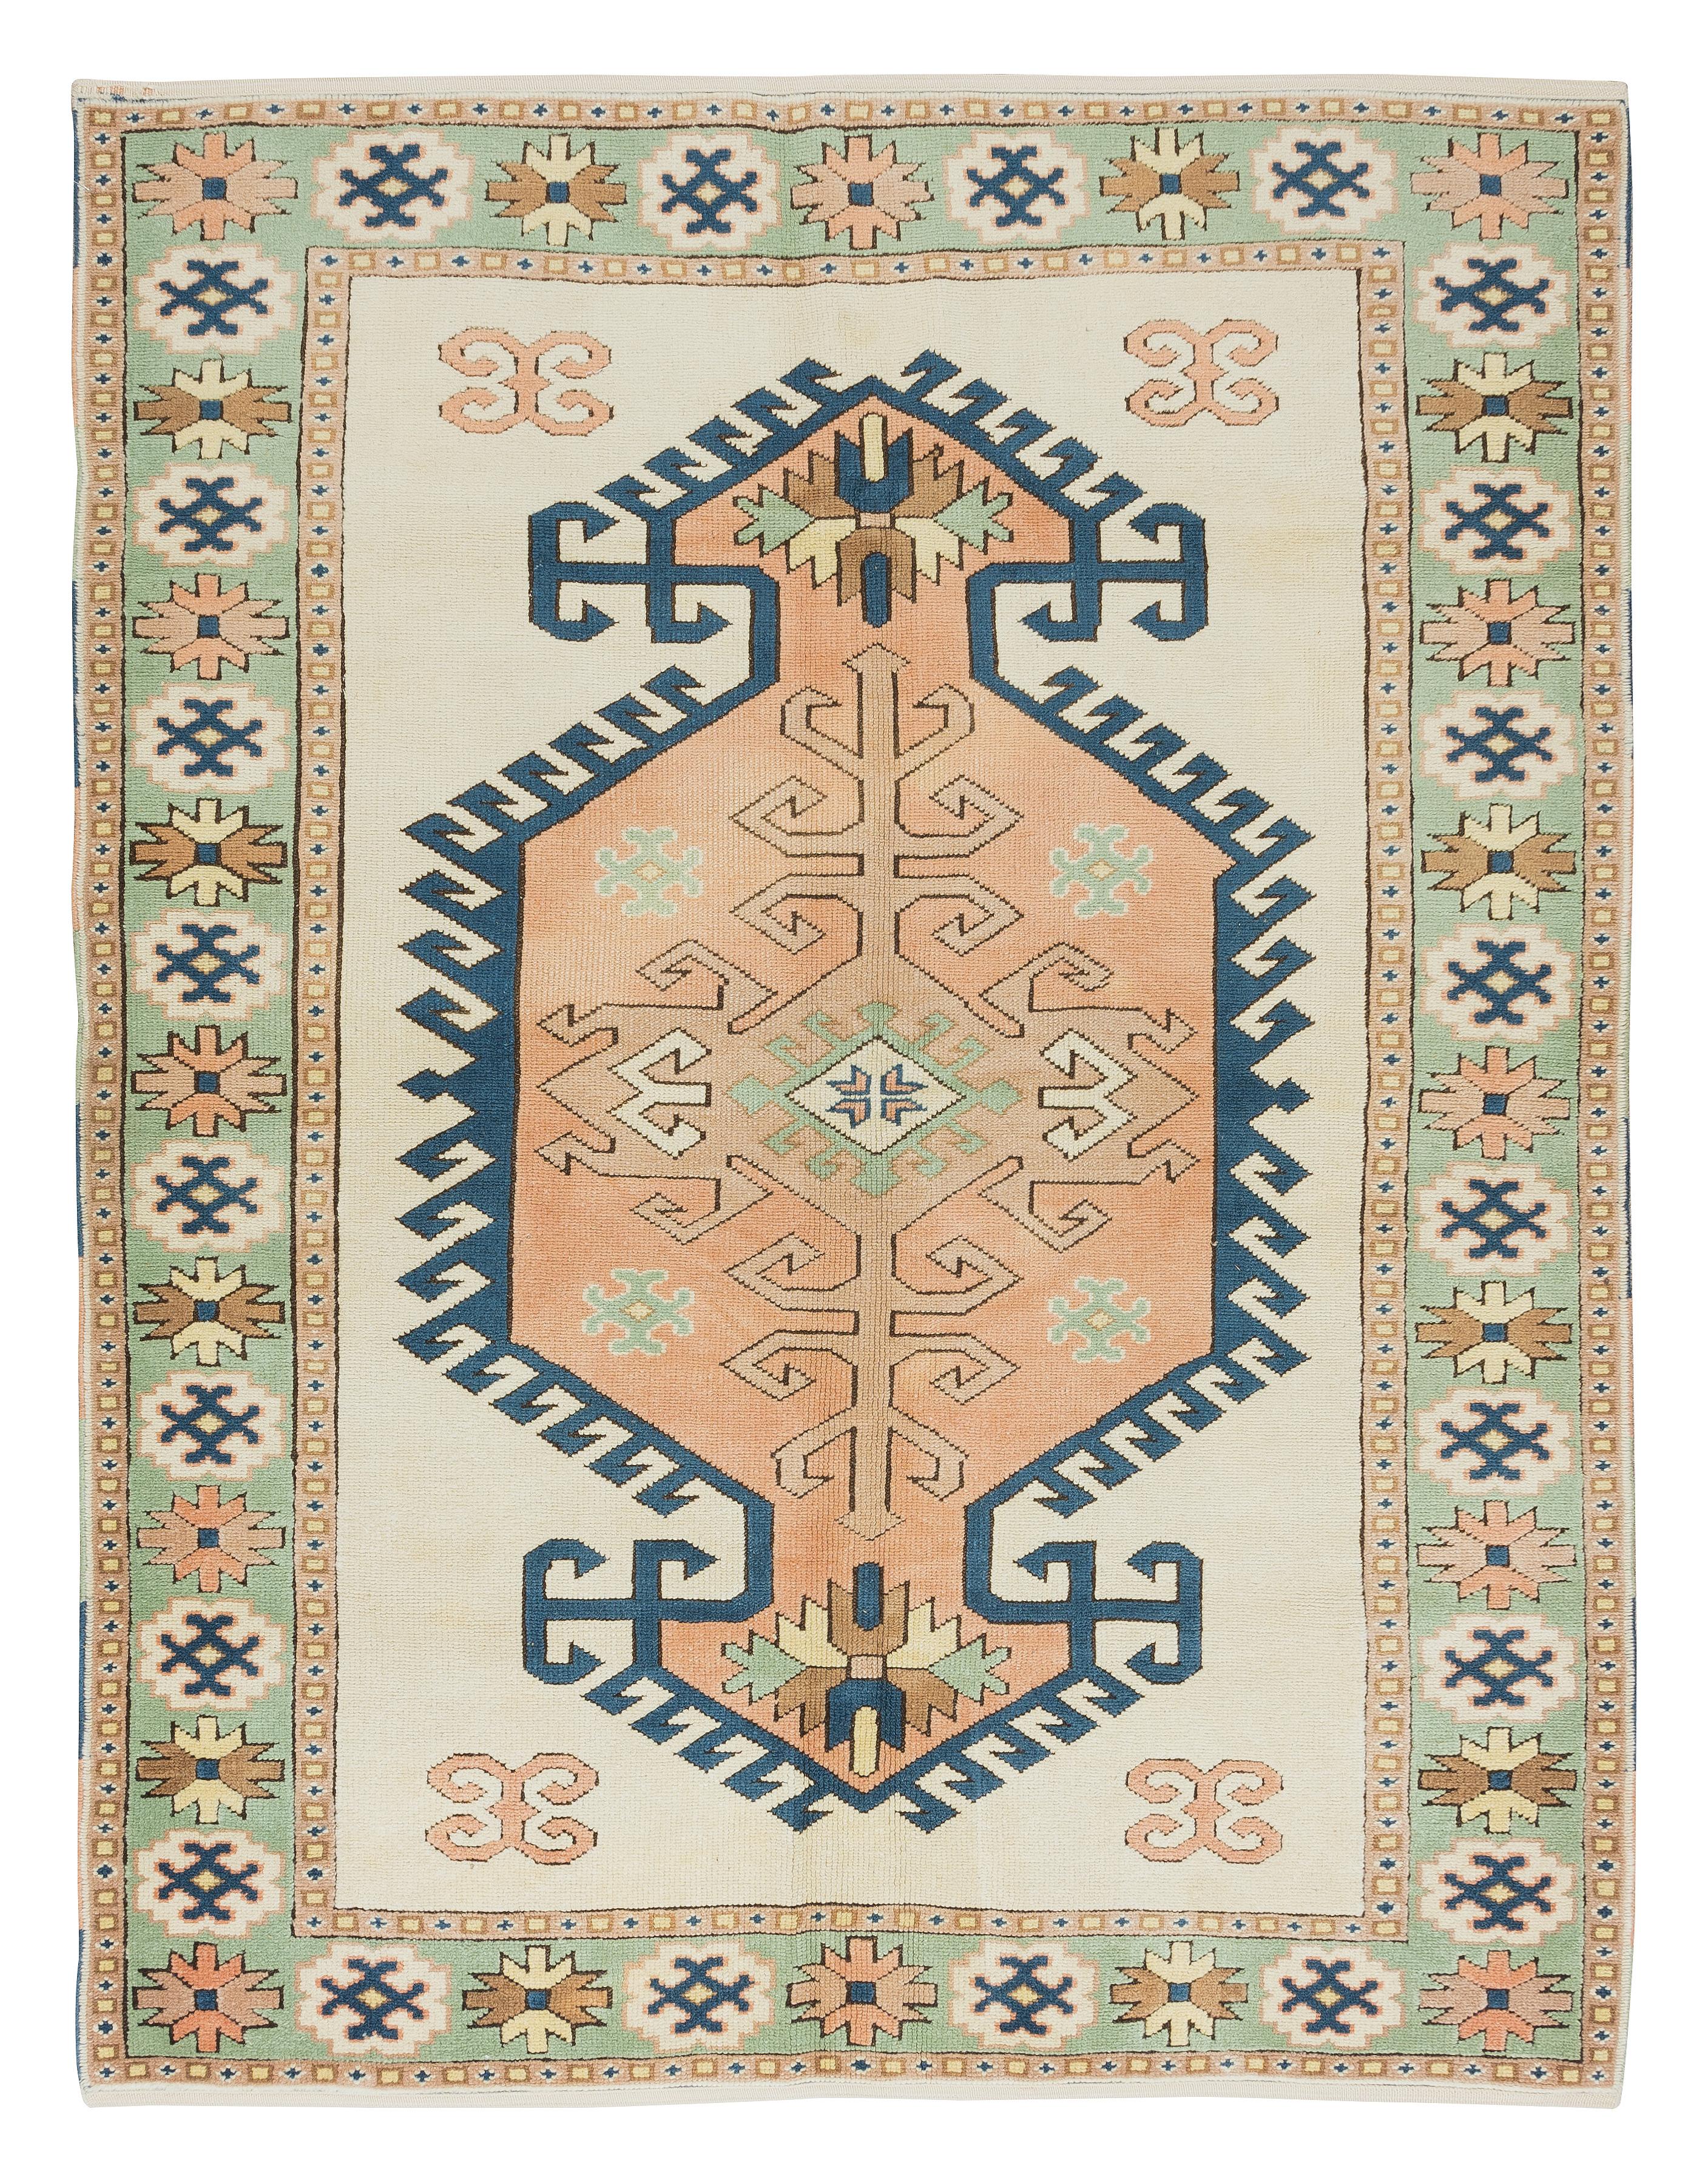 A finely hand-knotted vintage Turkish rug from 1960s. The rug is made of medium wool pile on wool foundation. It is heavy and lays flat on the floor, in very good condition with no issues. It has been washed professionally, the rug is sturdy and can